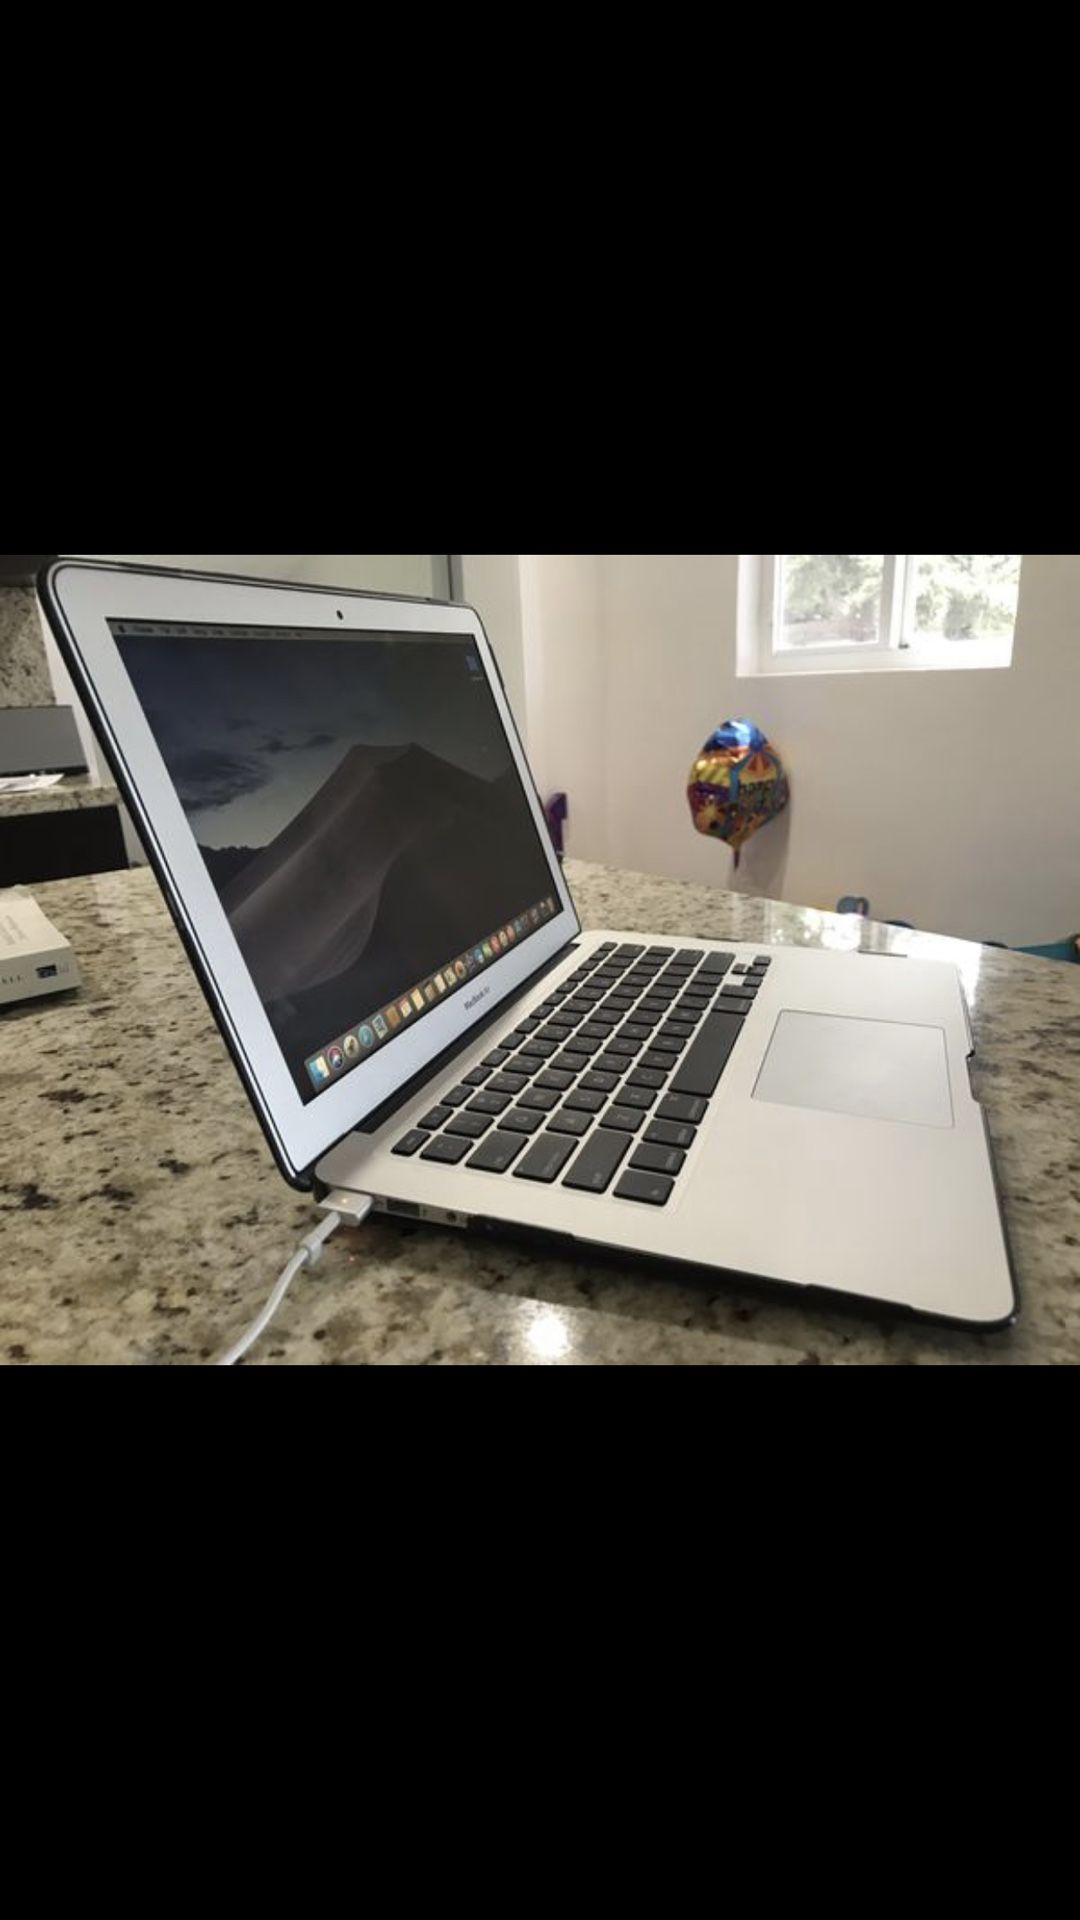 2015 MacBook Air 13” i5 8GB 128 SSD excellent condition —-5⭐️⭐️⭐️⭐️⭐️ Seller—-Back To School Sale***